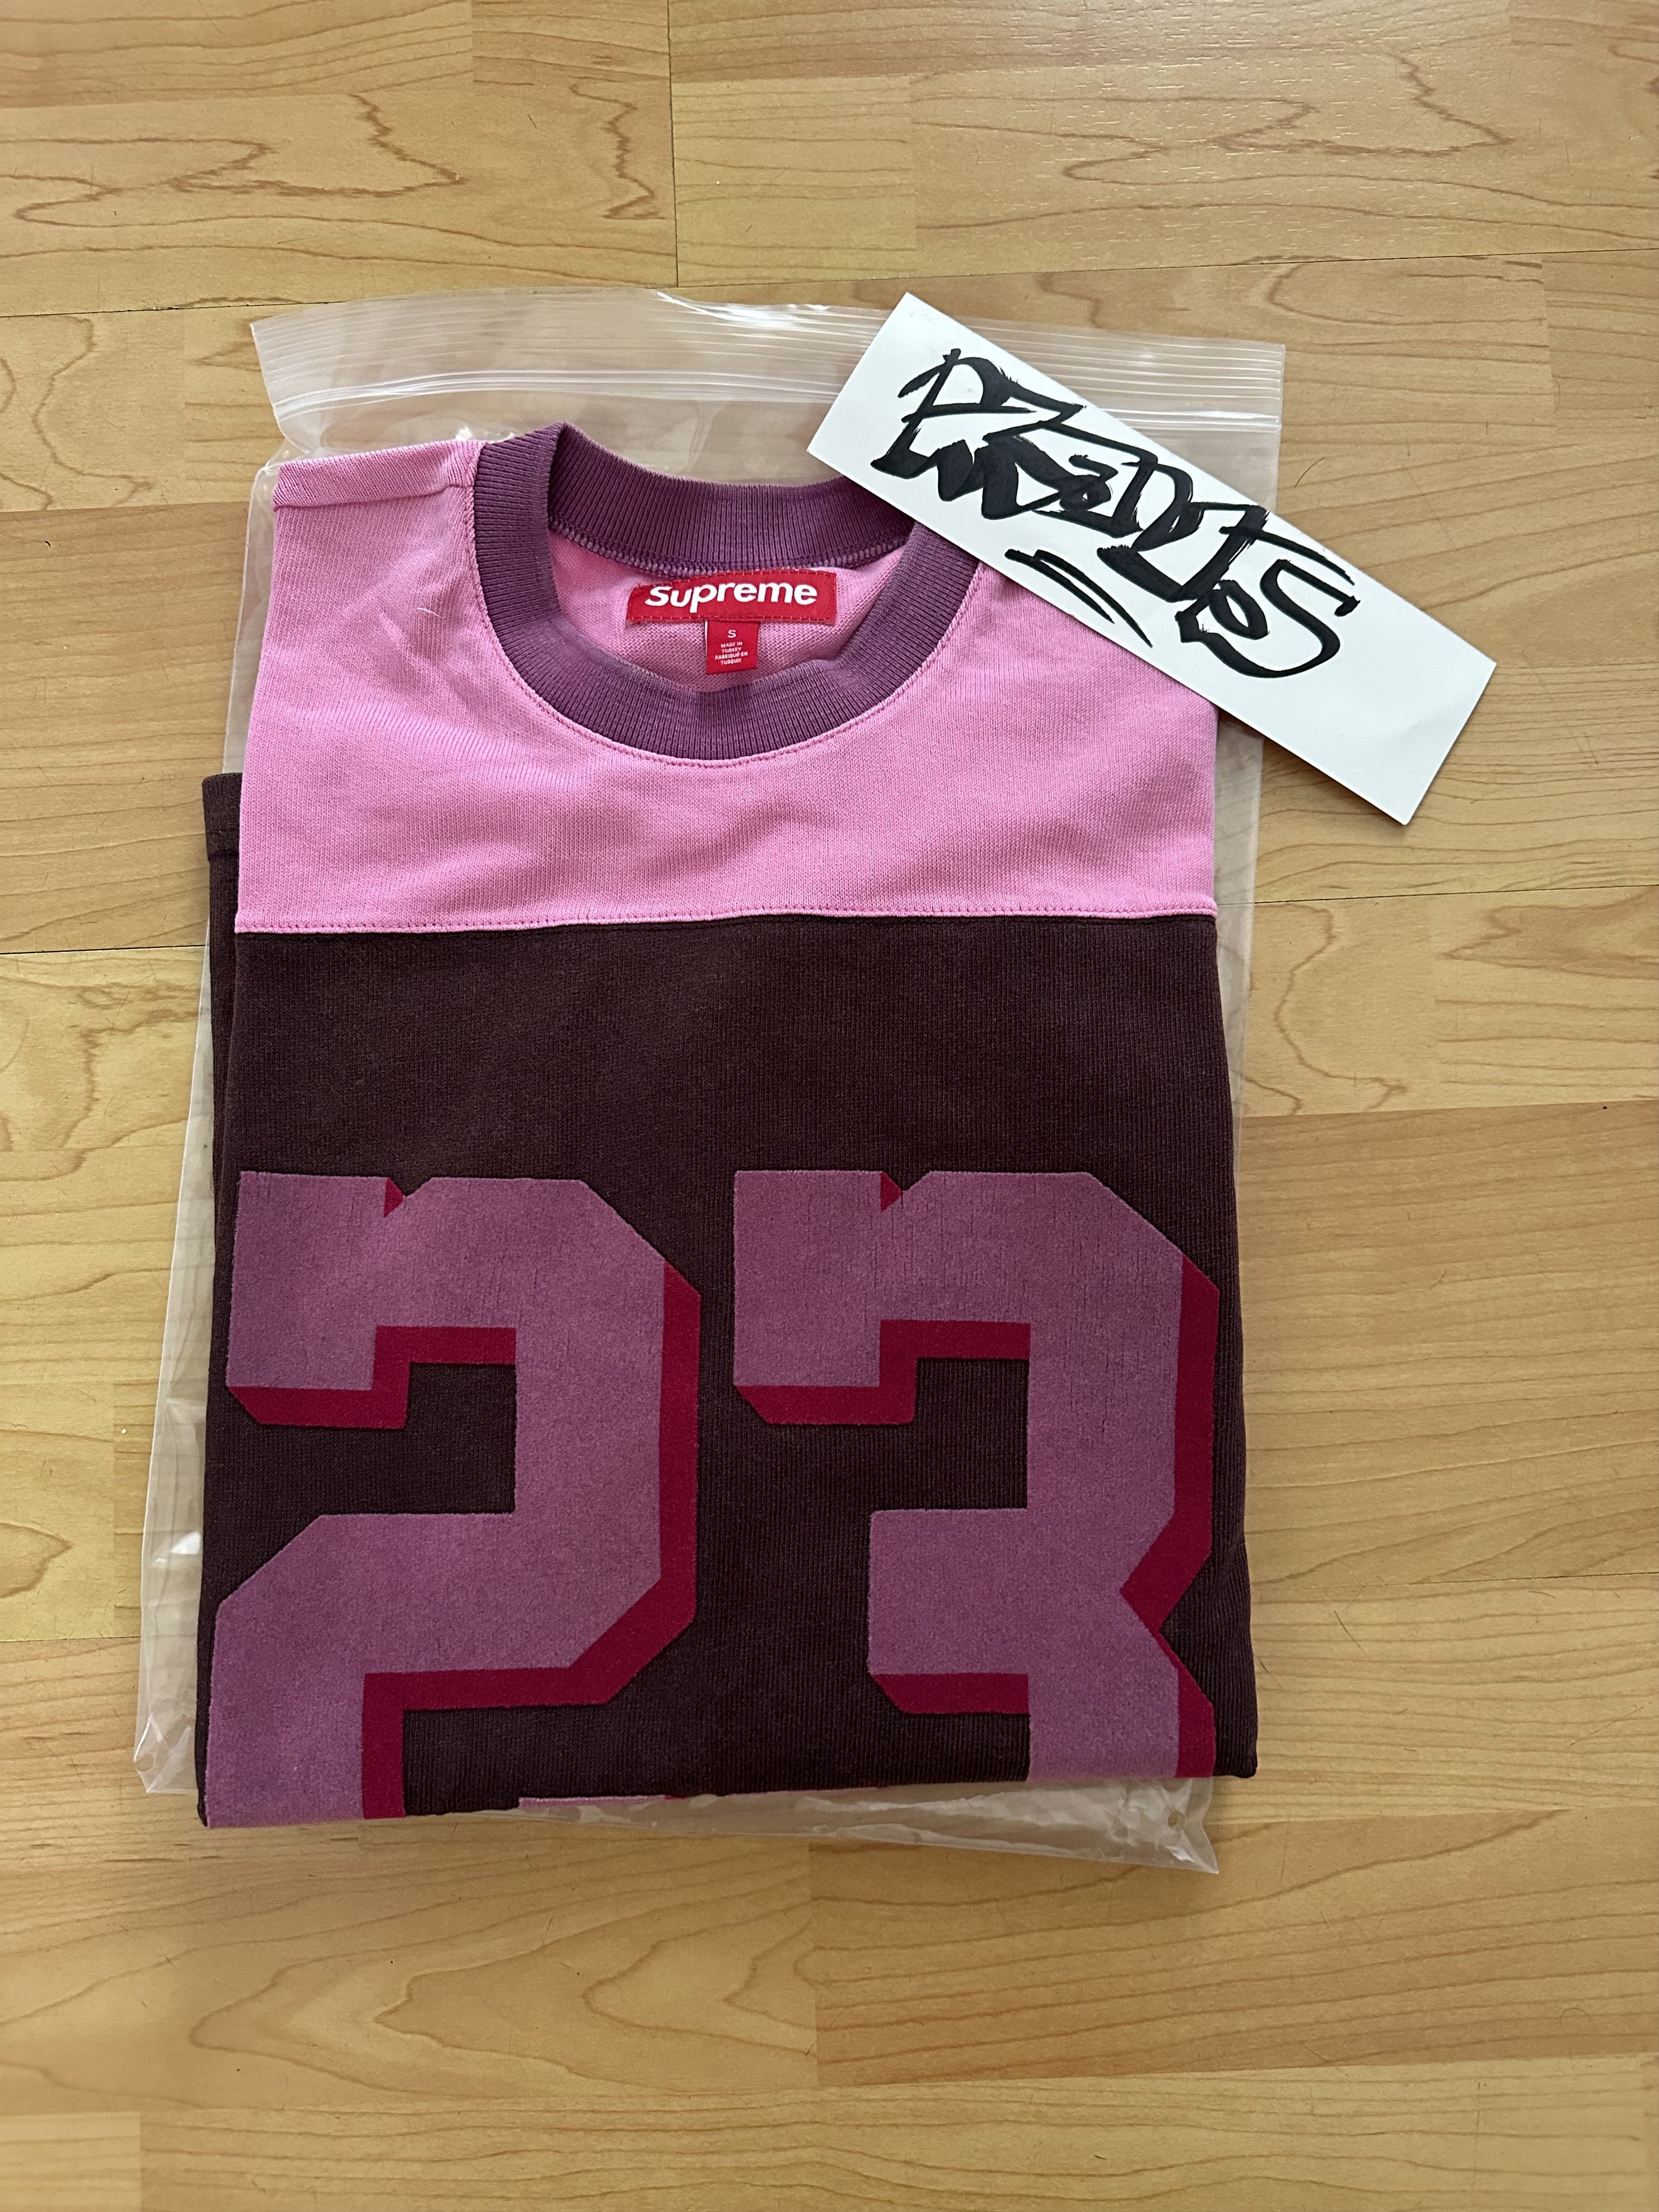 Supreme Supreme Bumblebee L/S Football Top Jersey Pink - Small 